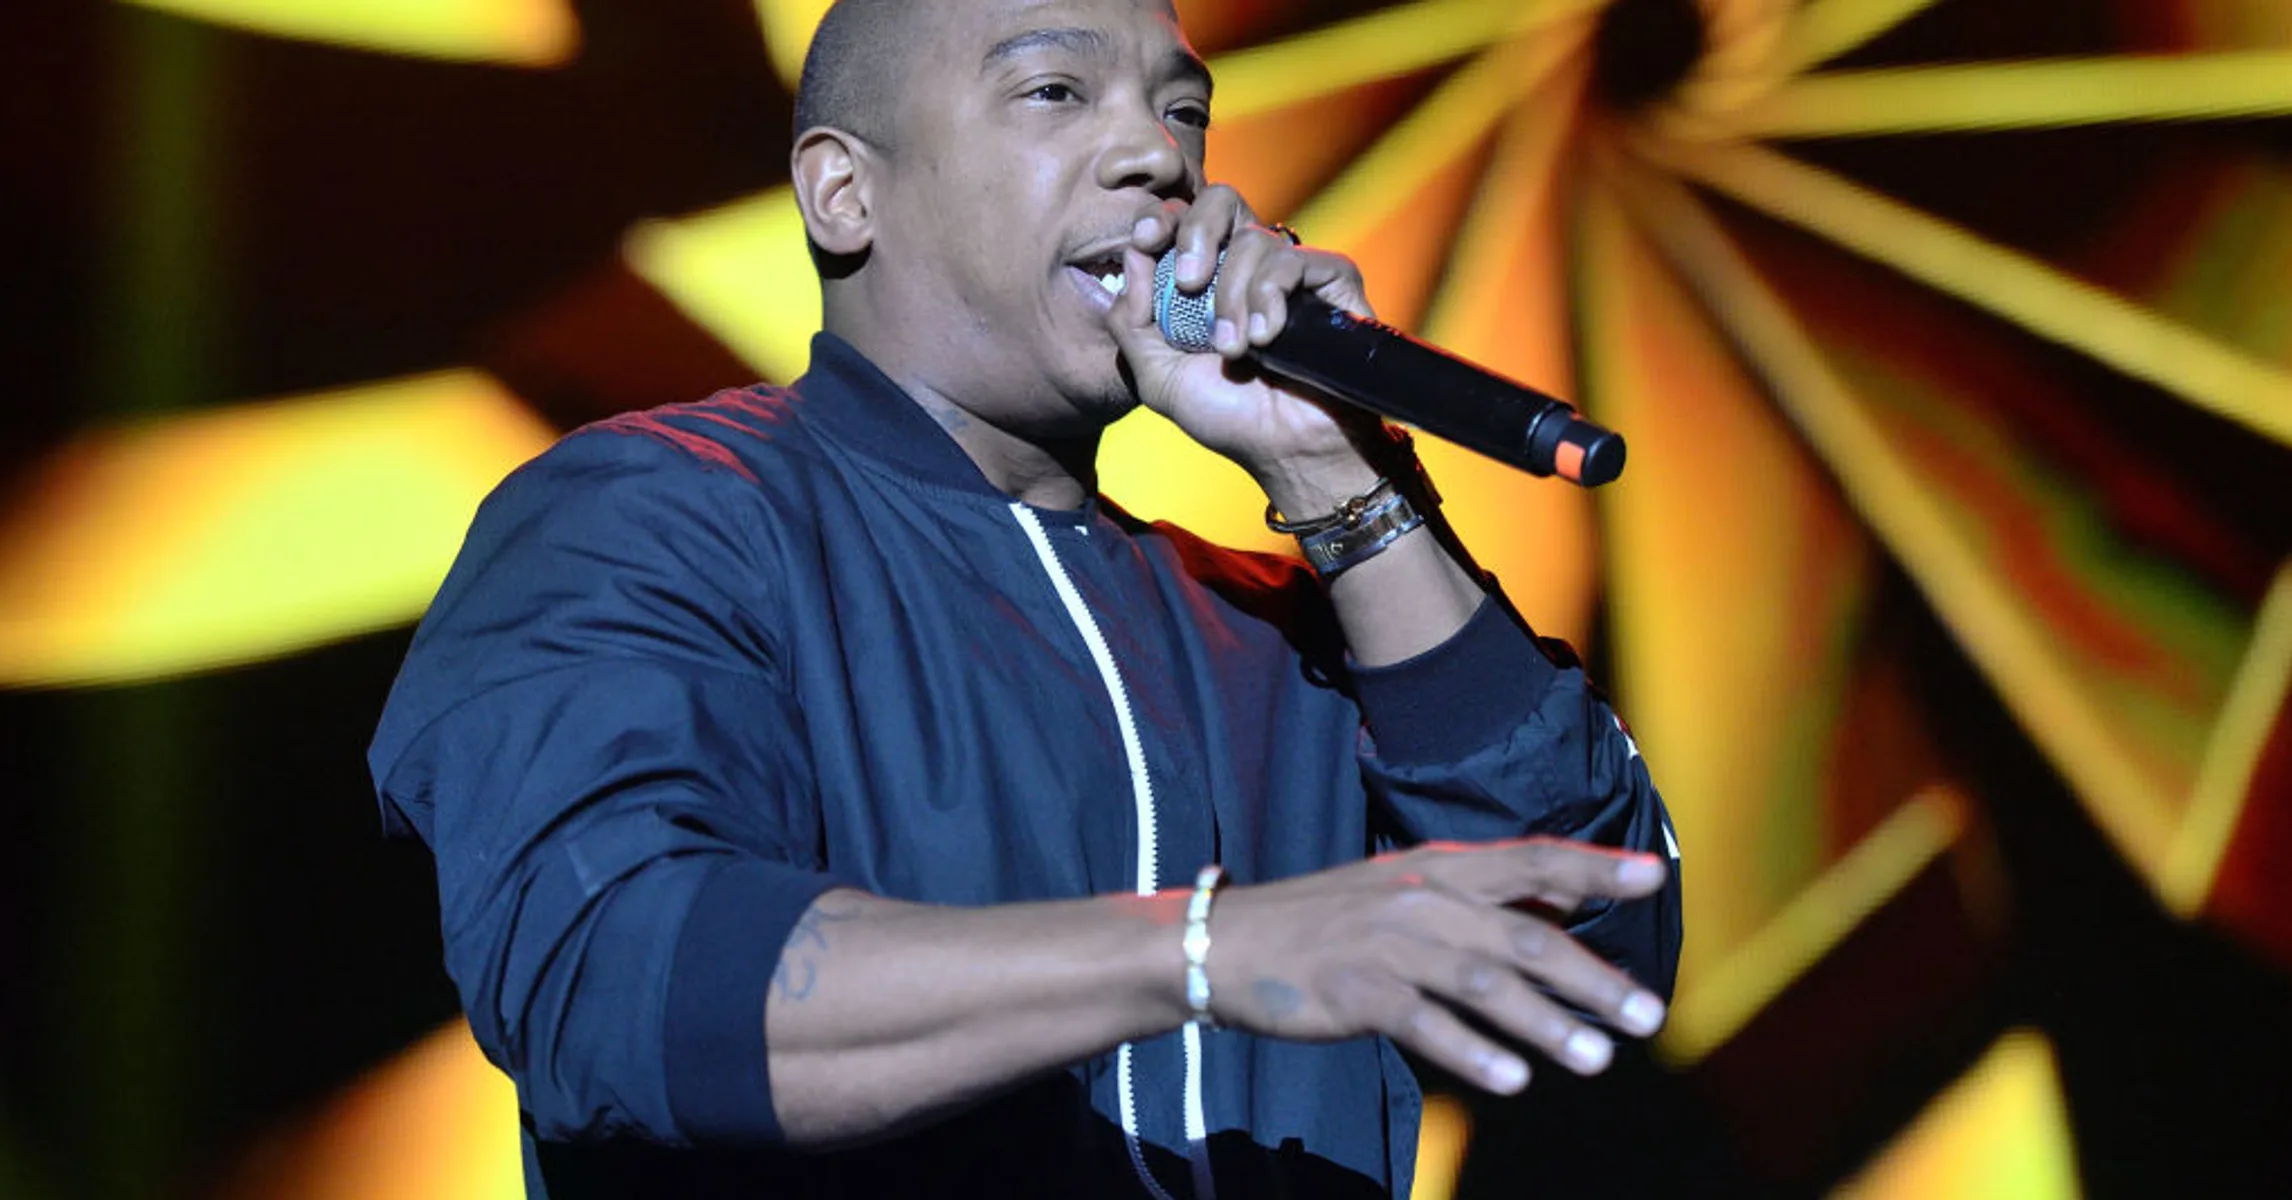 Ja Rule Claims 50 Cent Had An Order Of Protection During Their Feud